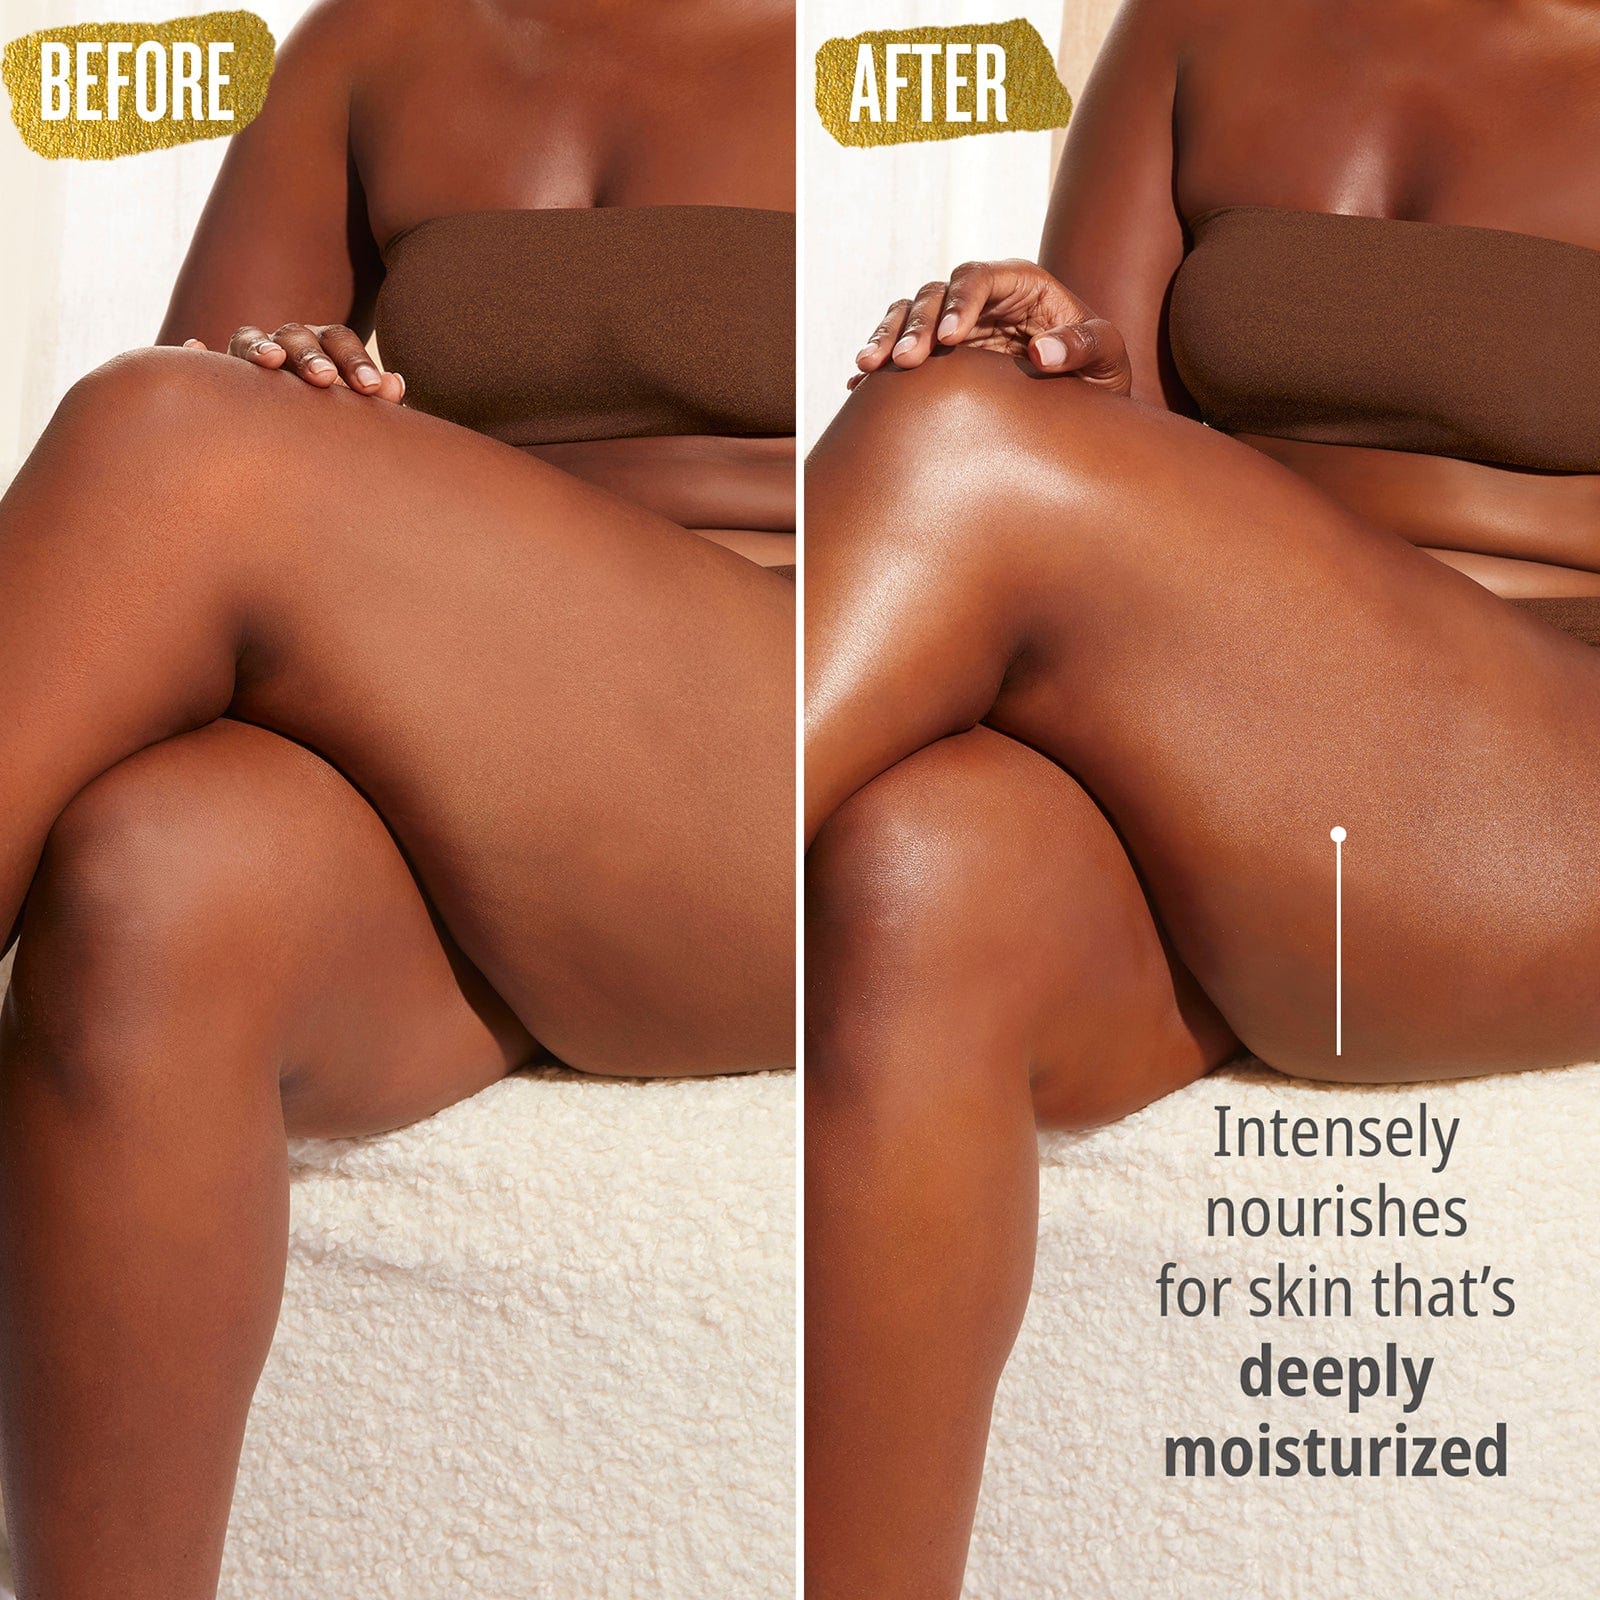 before | after - intensely nourishes for skin that&